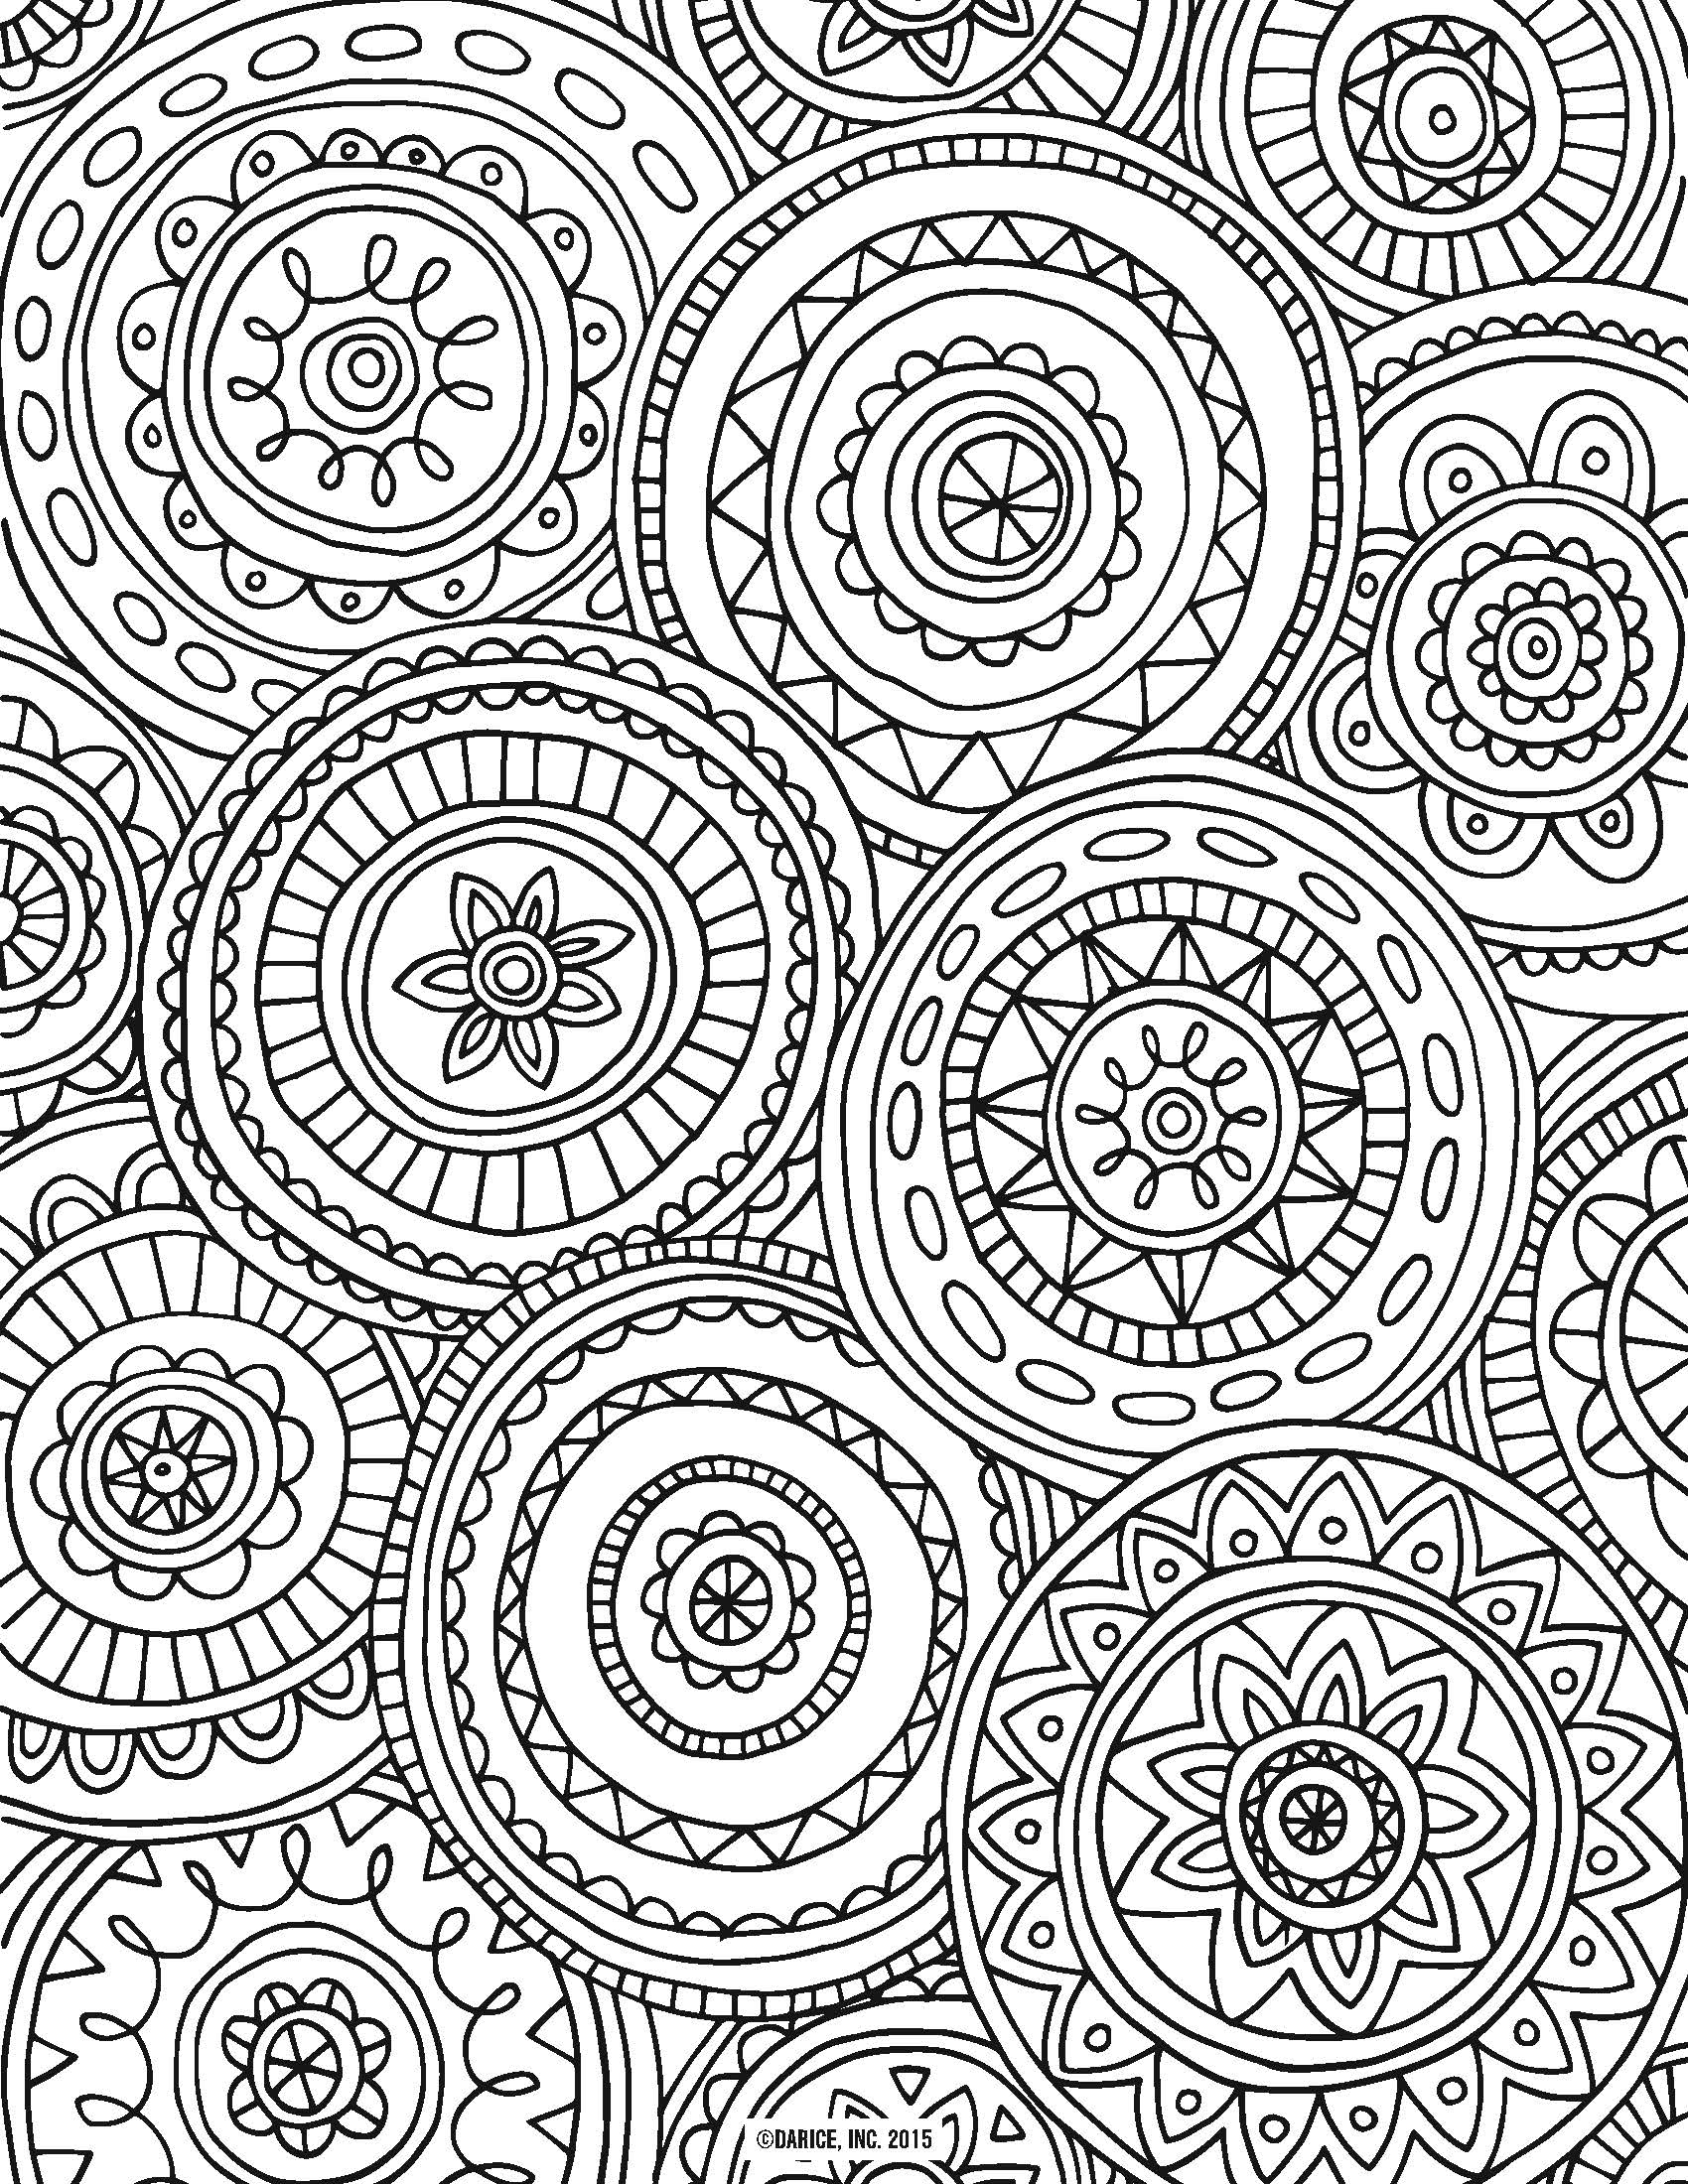 Free Printable Coloring Pages For Adults Excellent - Coloring pages